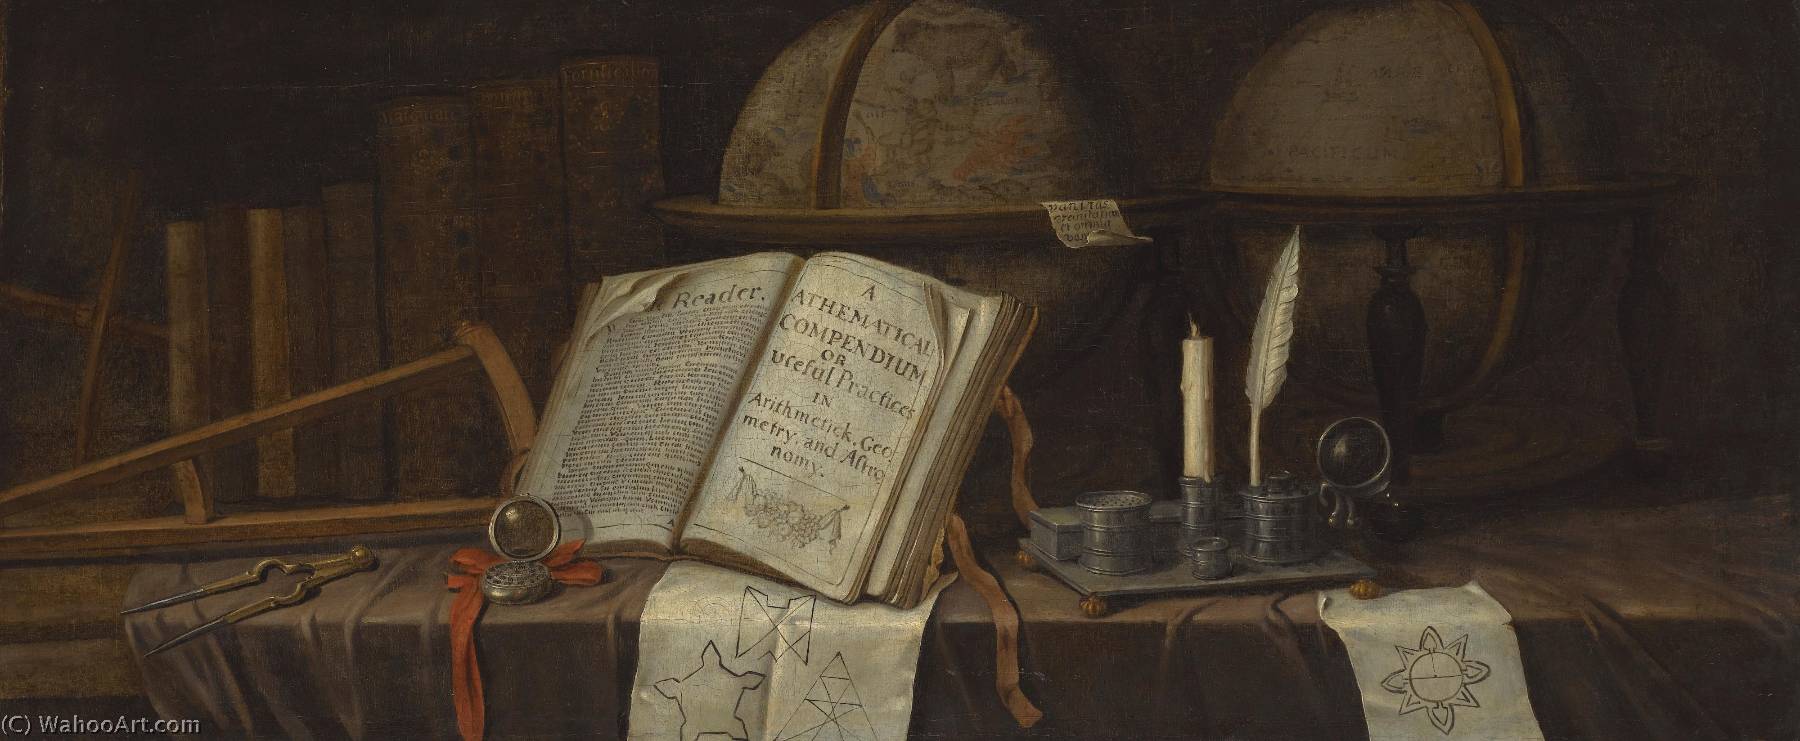  Artwork Replica A vanitas still life with celestial and terrestial globes, a pair of dividers, a sextant, an inkwell with a quill and a candle, and a copy of A mathematical compendium, or, Useful practices in arithmetick, geometry, and astronomy, geography and navigation, embattelling, and quartering of armies, fortification and gunnery, gauging and dyalling explaining the logarithms, with new indices, Nepair`s rods or bones, making of movements, and the application of pendulums with the projection of the sphere for an universal dyal, Etc by Sir Jonas Moore by Edwaert Collier (1642-1708) | ArtsDot.com